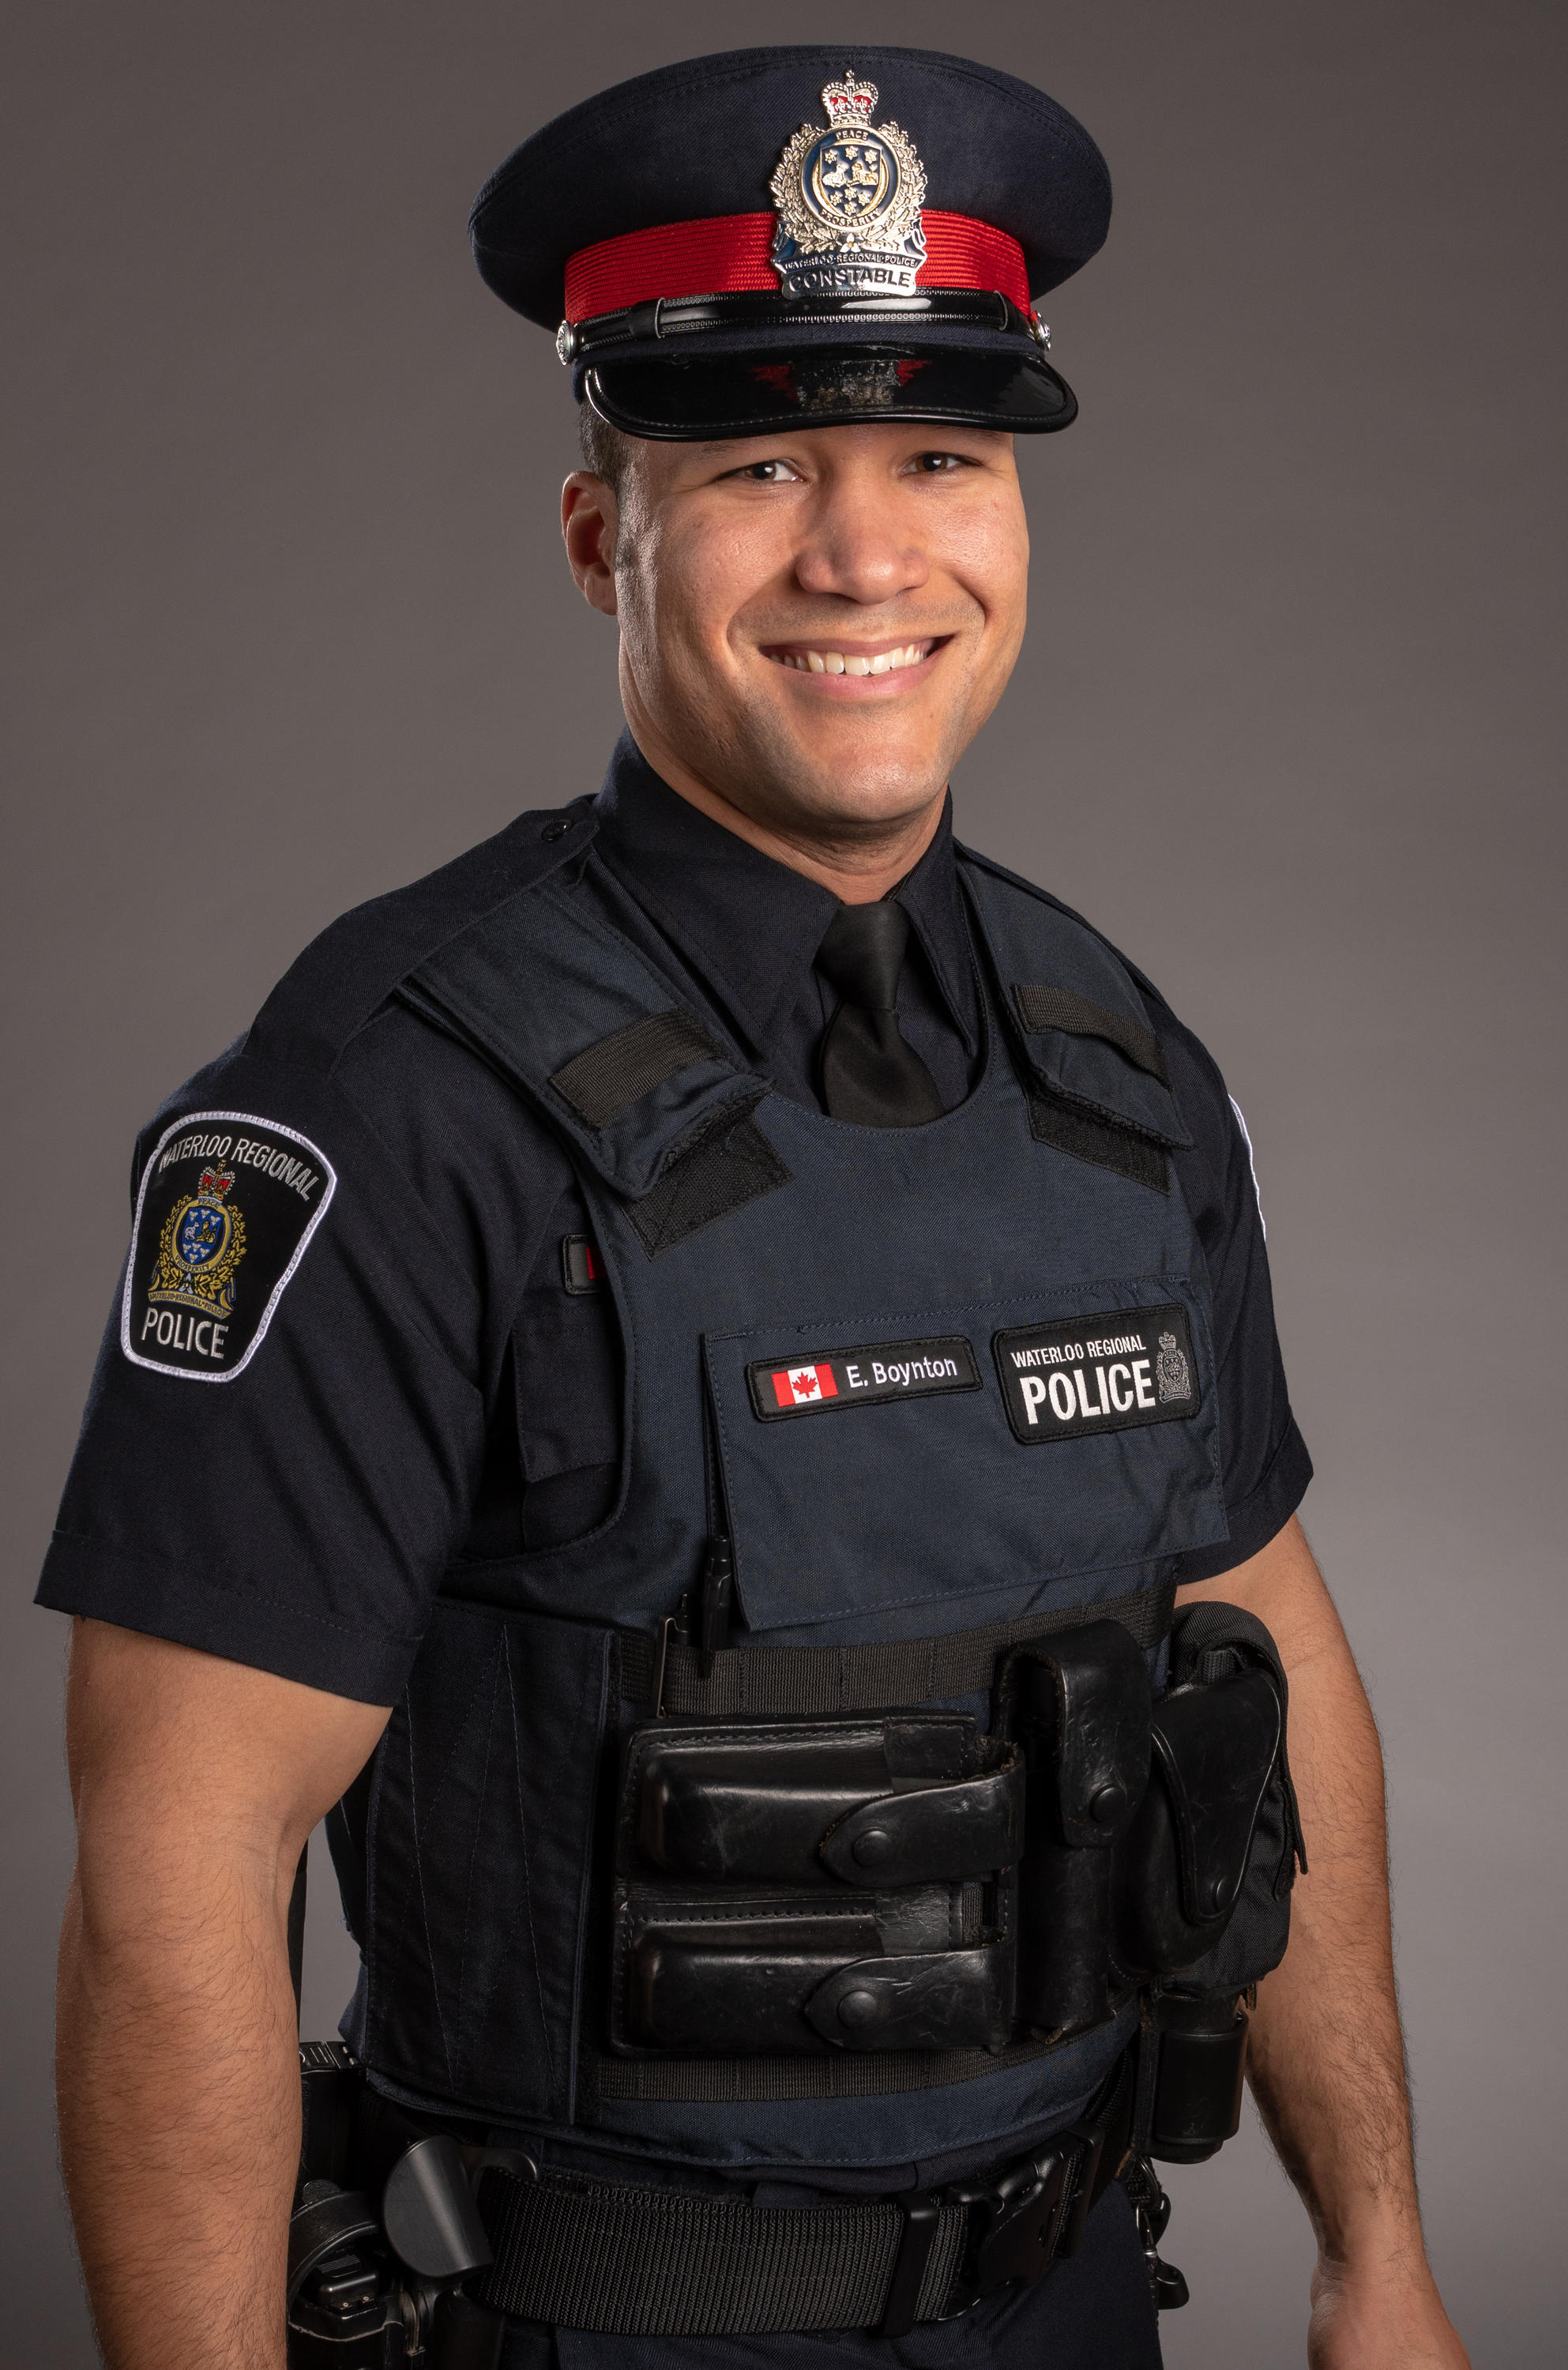 Cst. Eric Boynton's headshot. He is wearing his uniform and smiling into the camera.